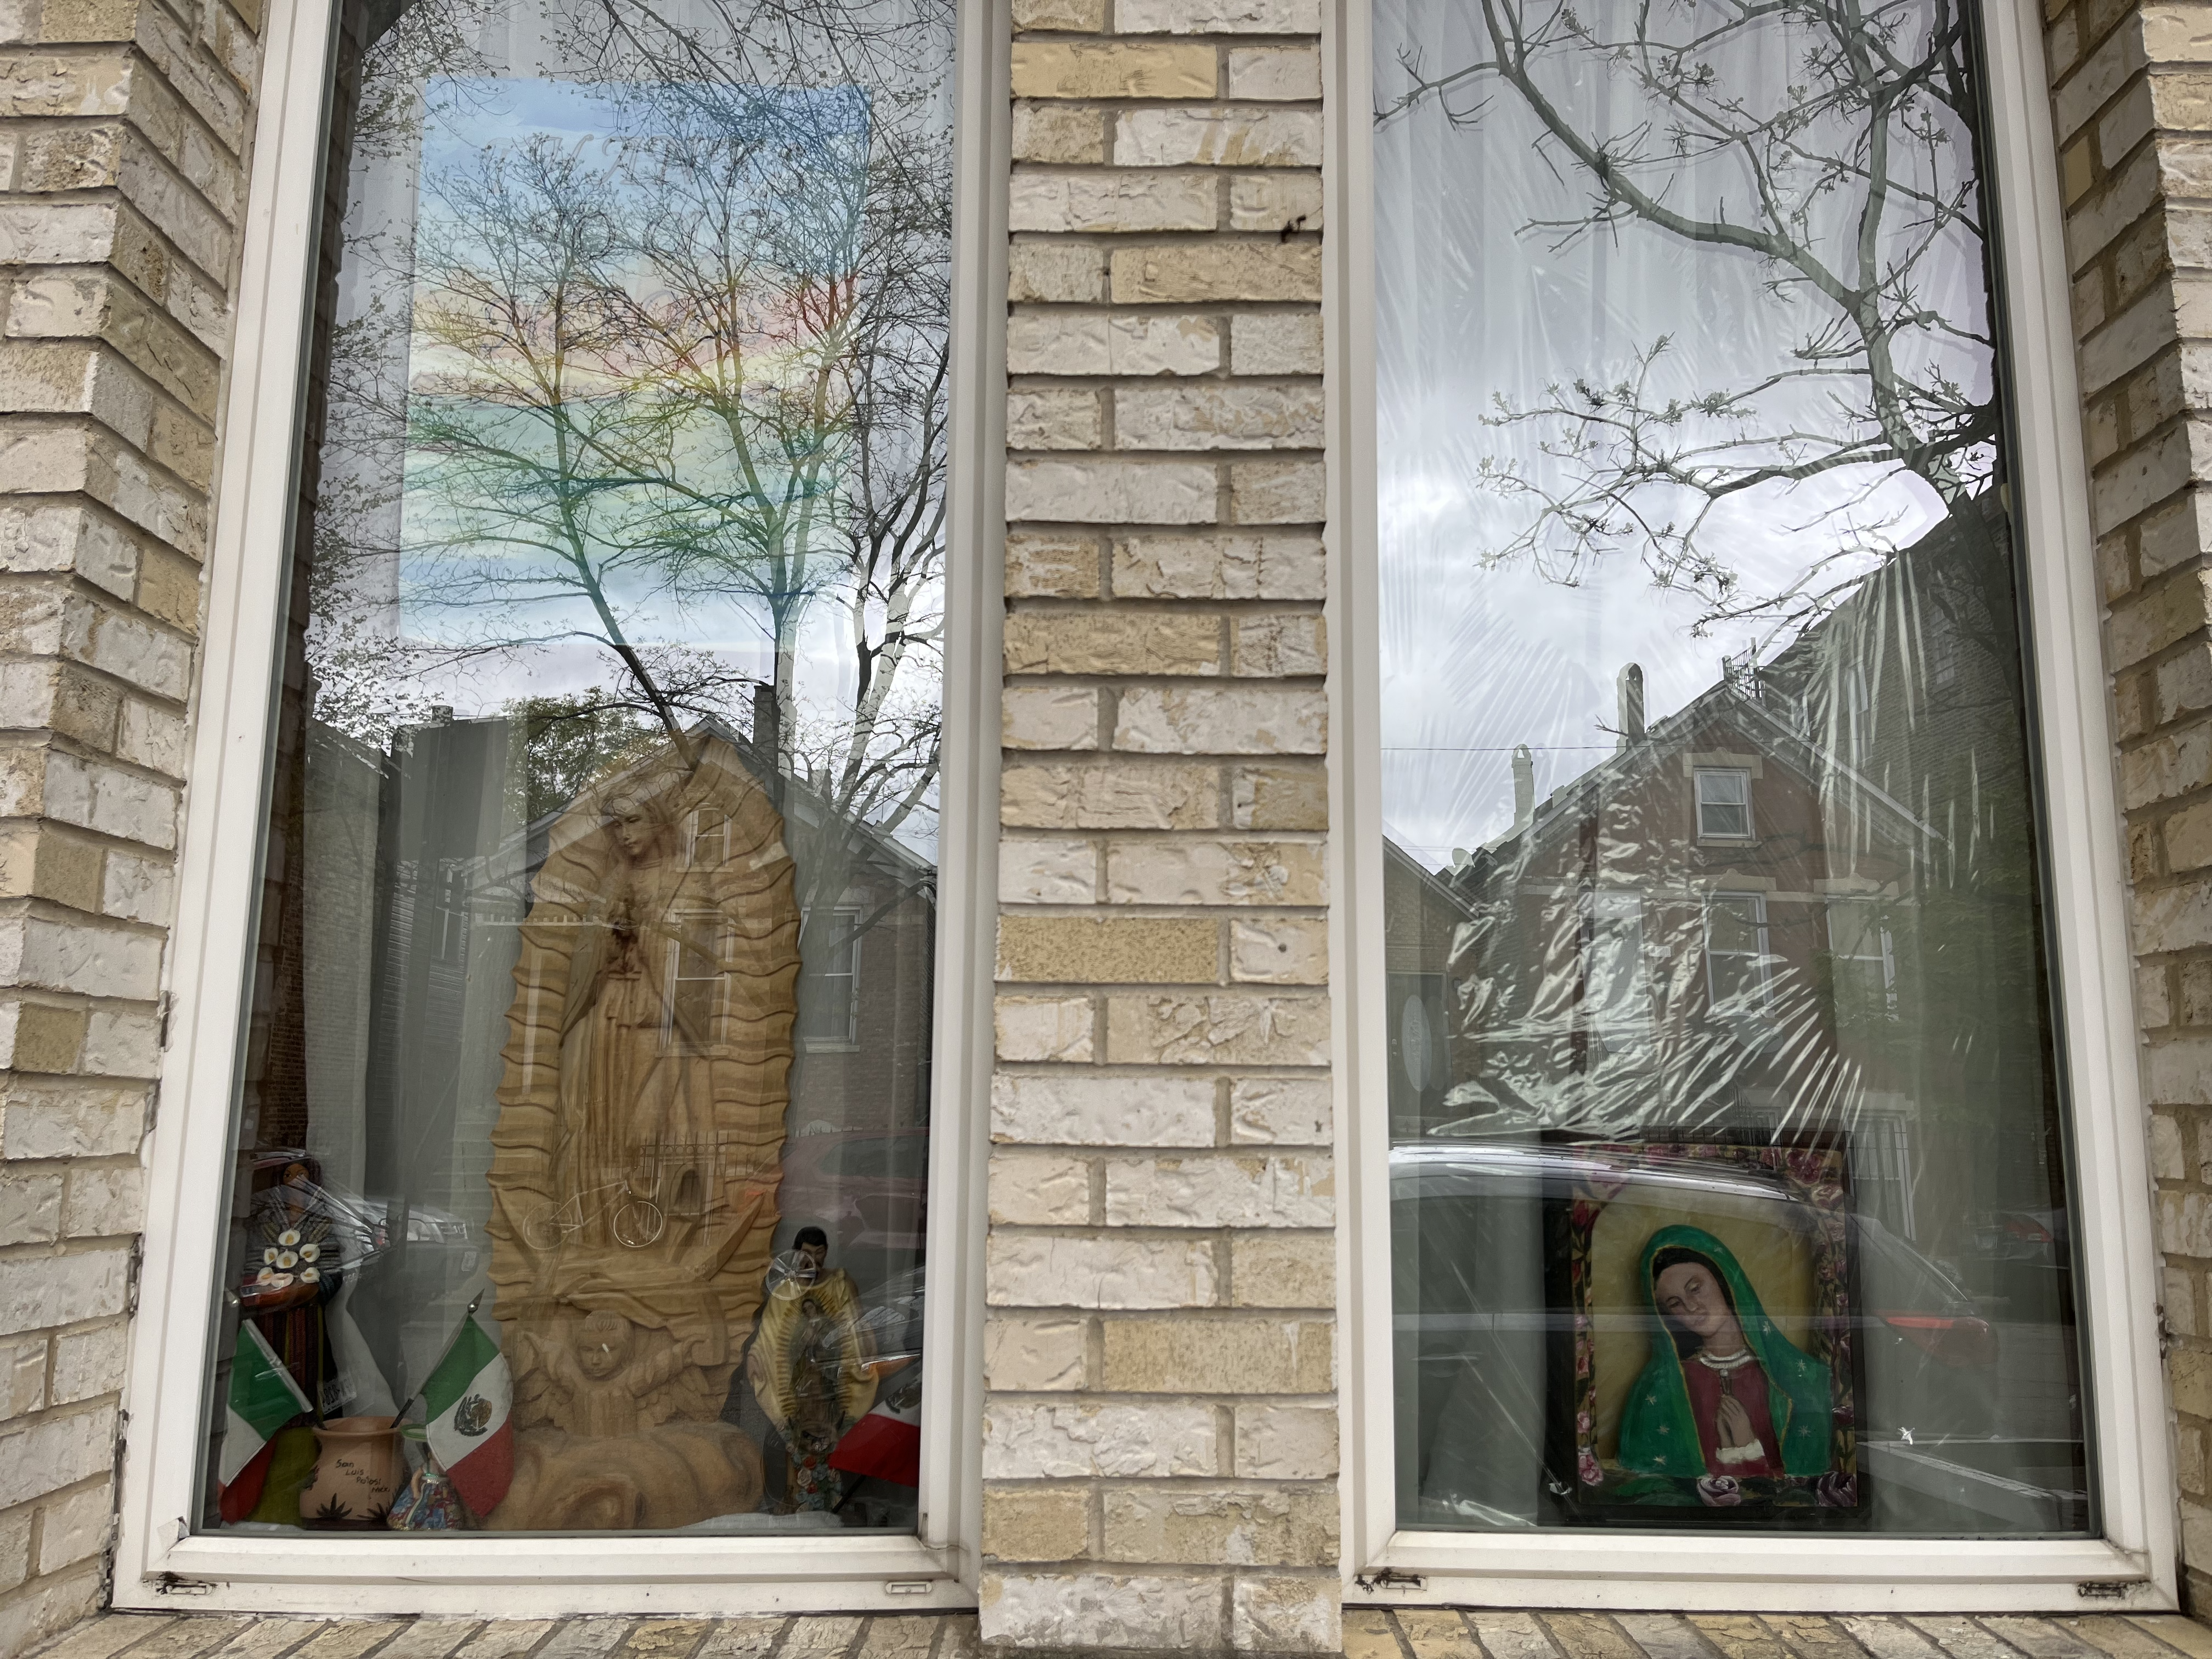 A window with religious figurines in it. 